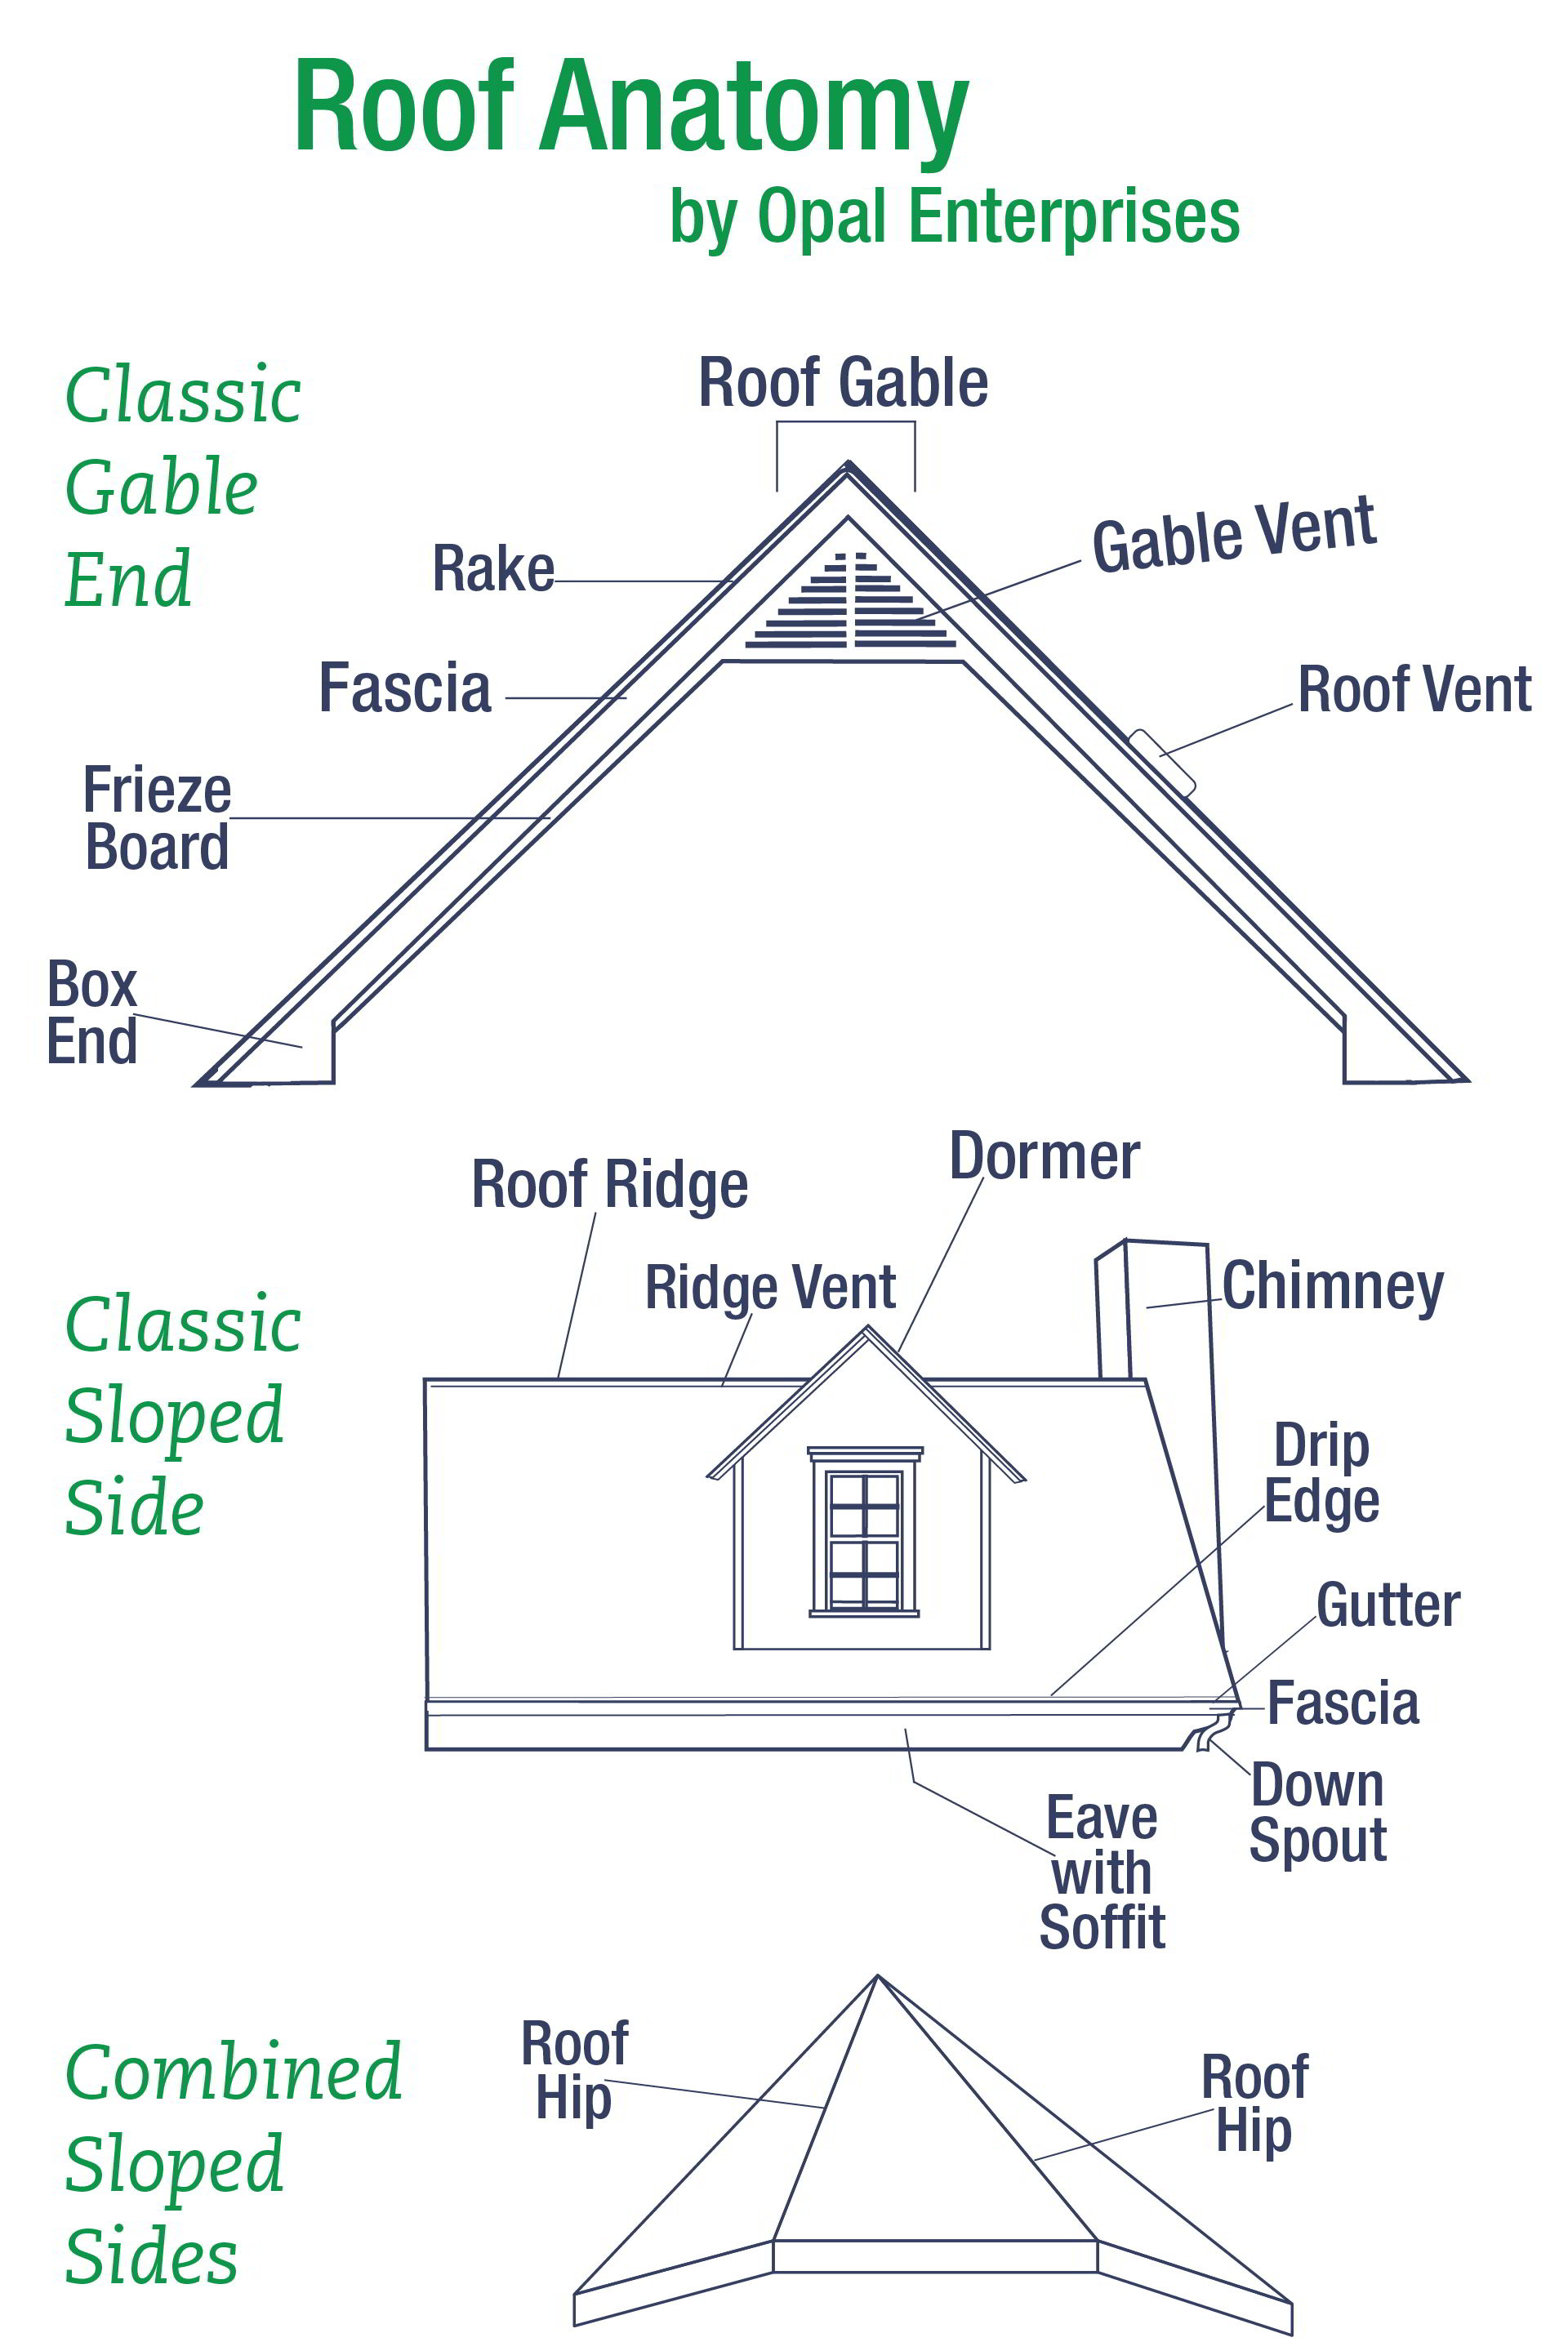 Guide To Roof Shapes And Roof Anatomy Opal Enterprises Inc